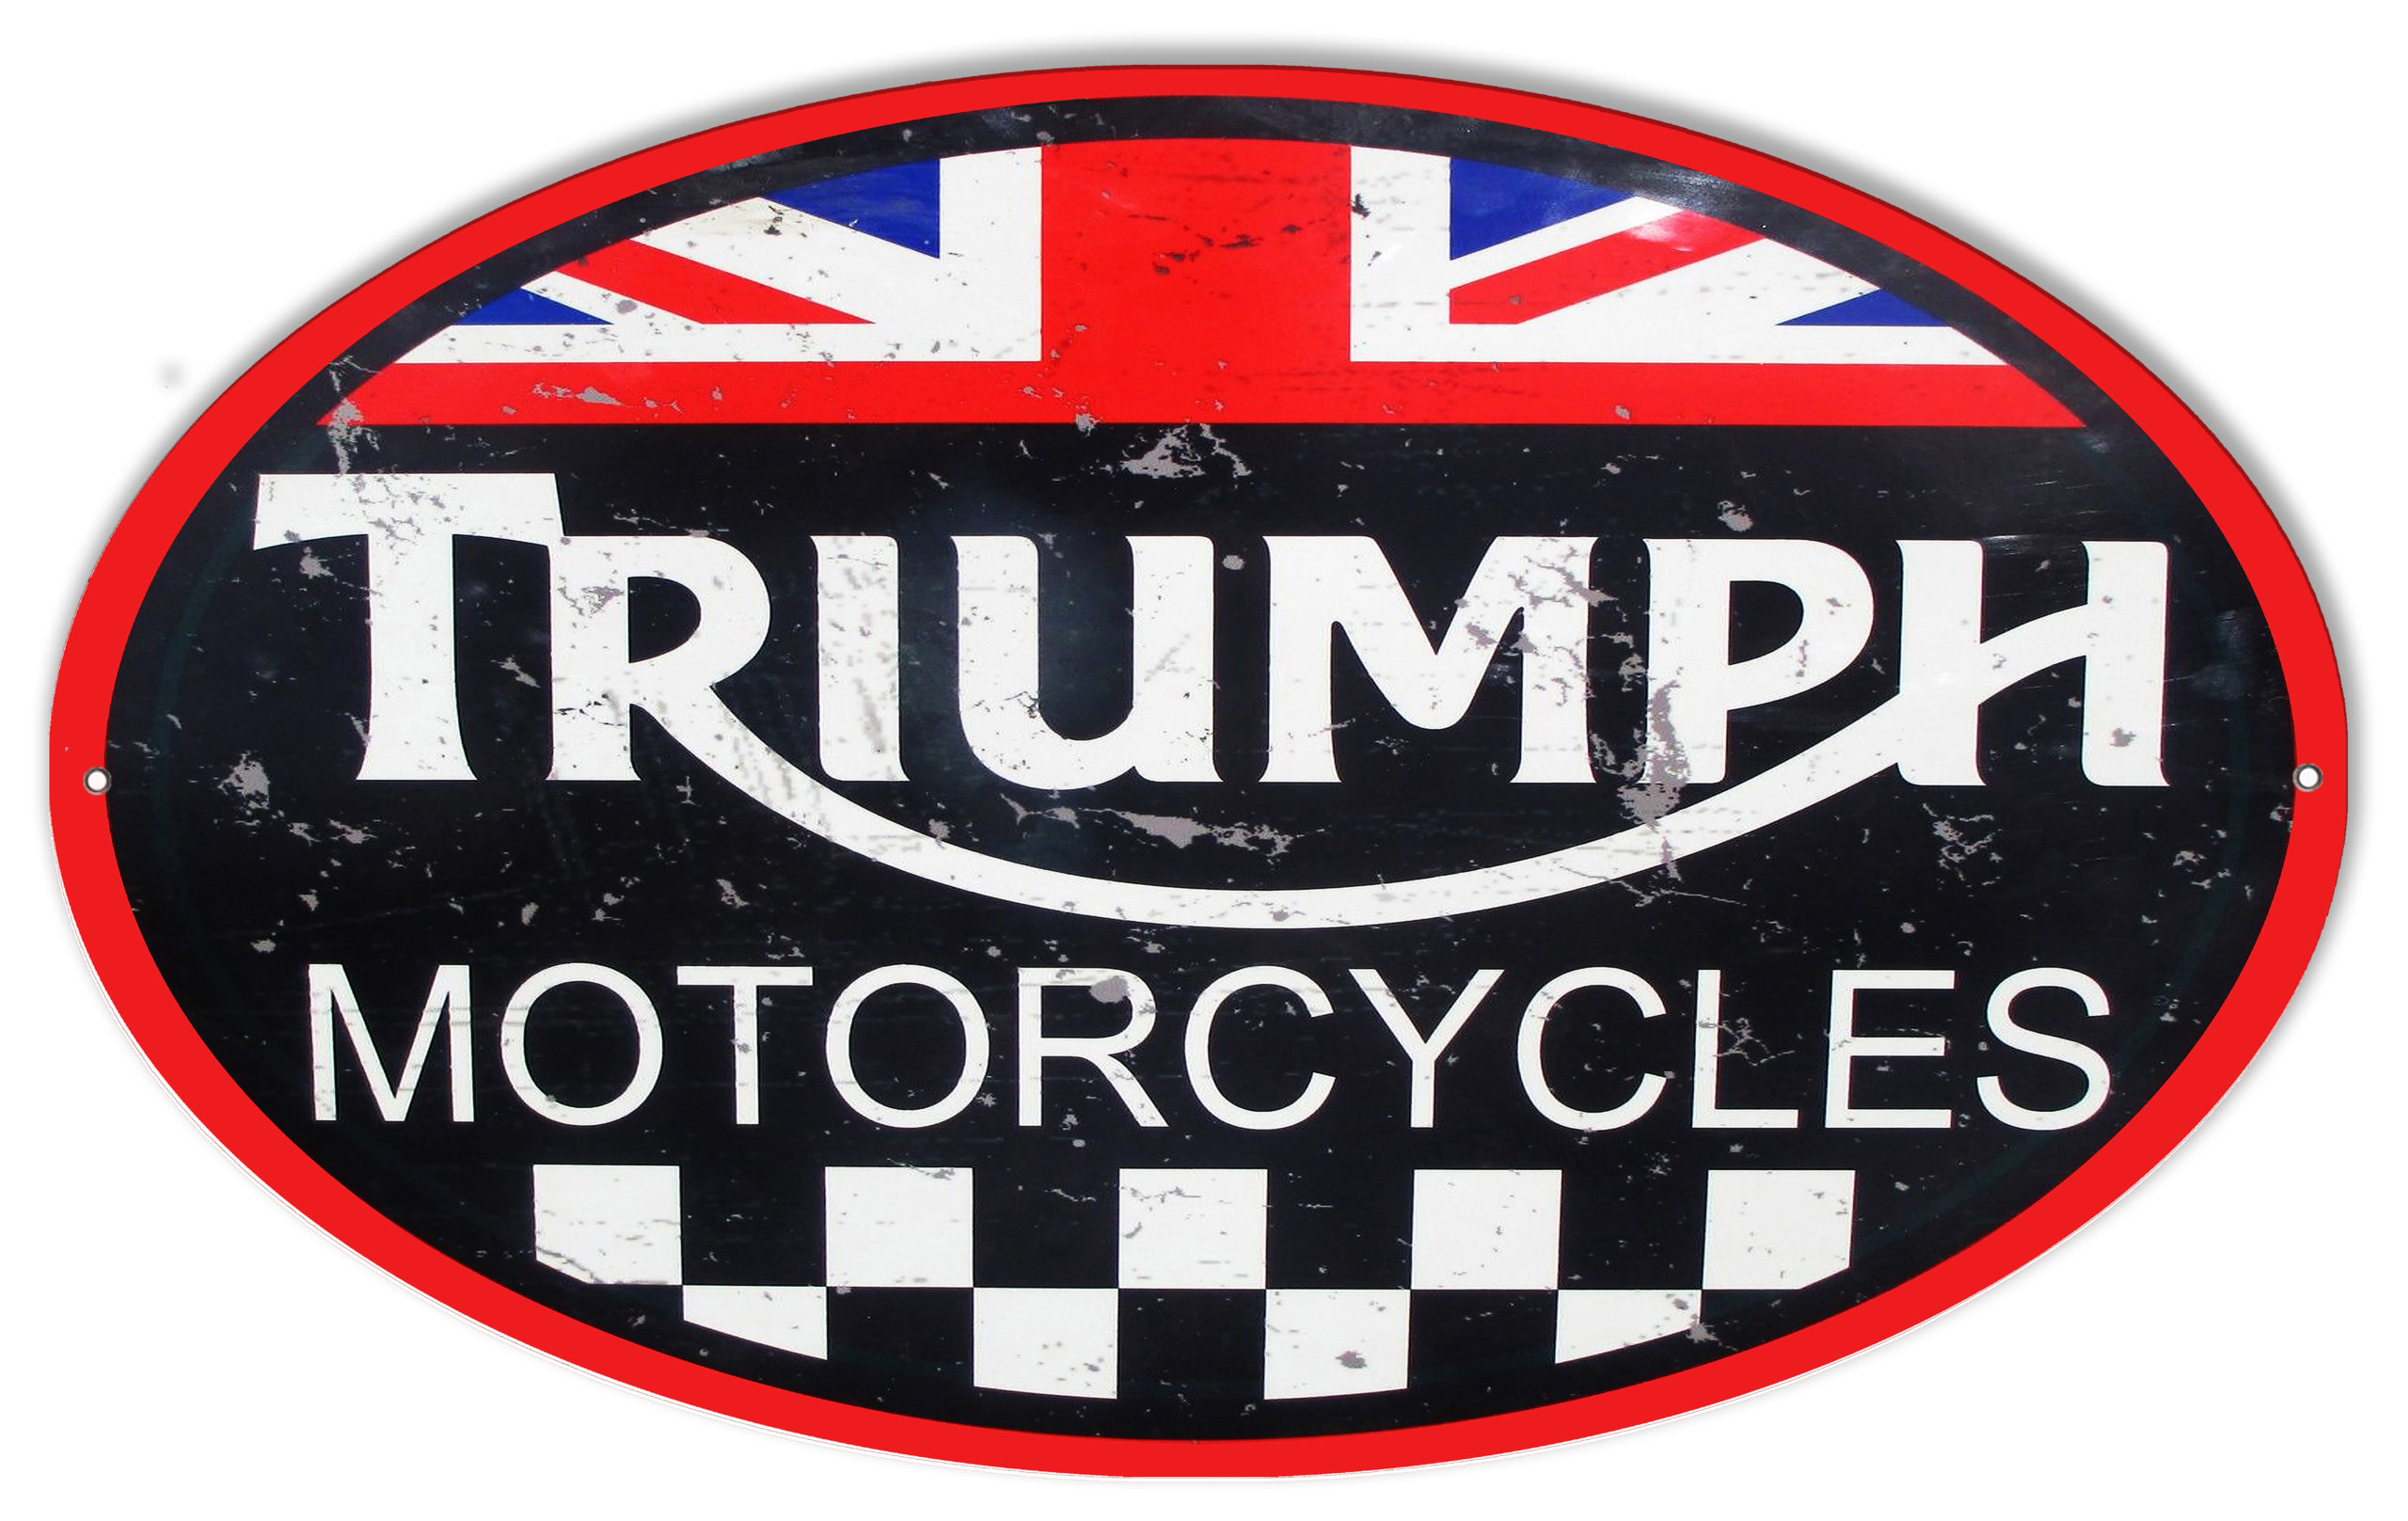 Triumph Motorcycles Reproduction Garage Shop Sign 9x14 Oval